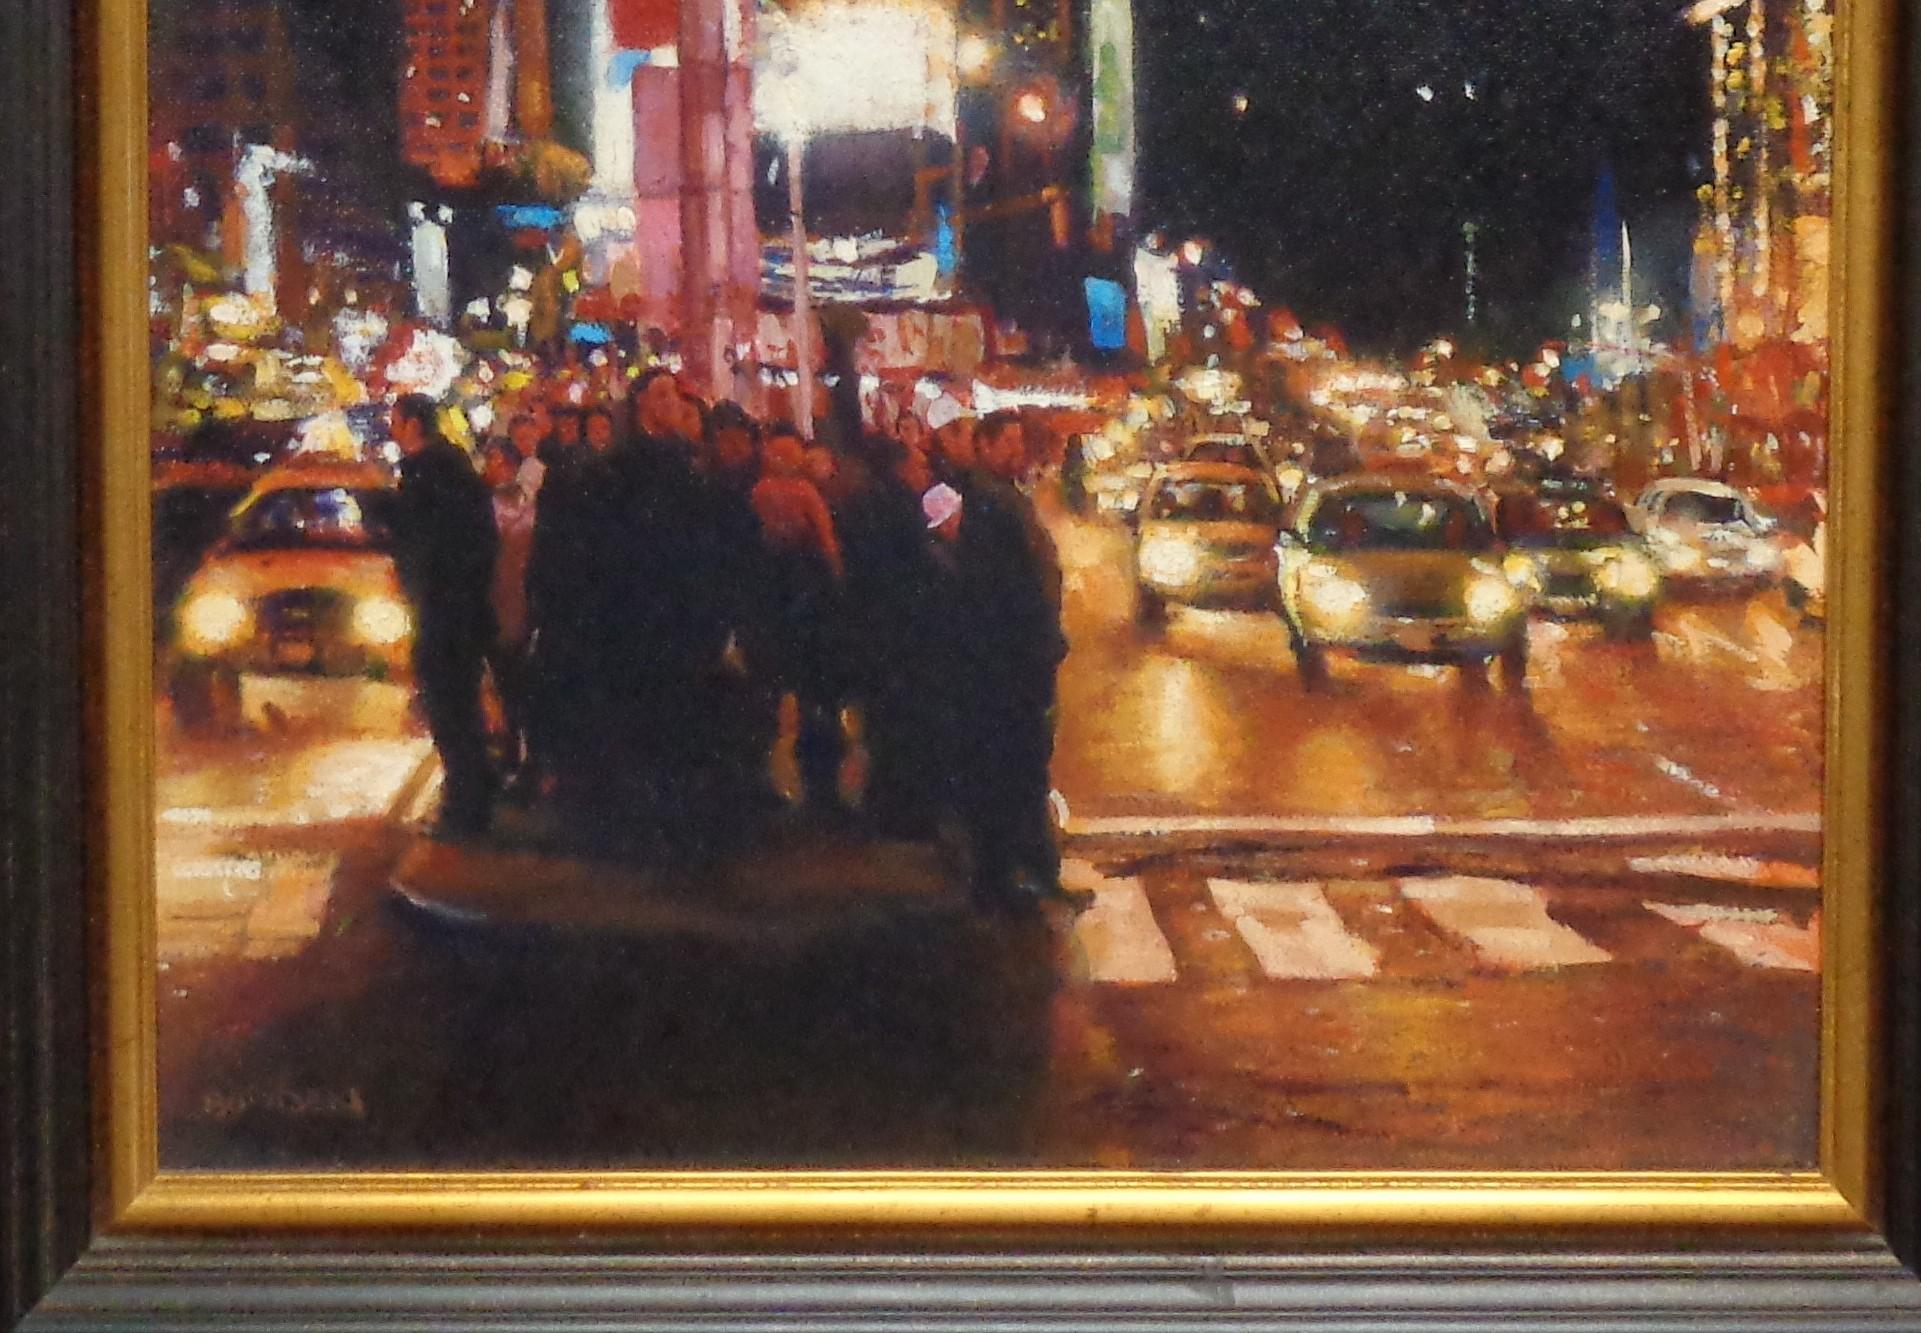  New York City Painting Times Square, Nocturne by Michael Budden  For Sale 3